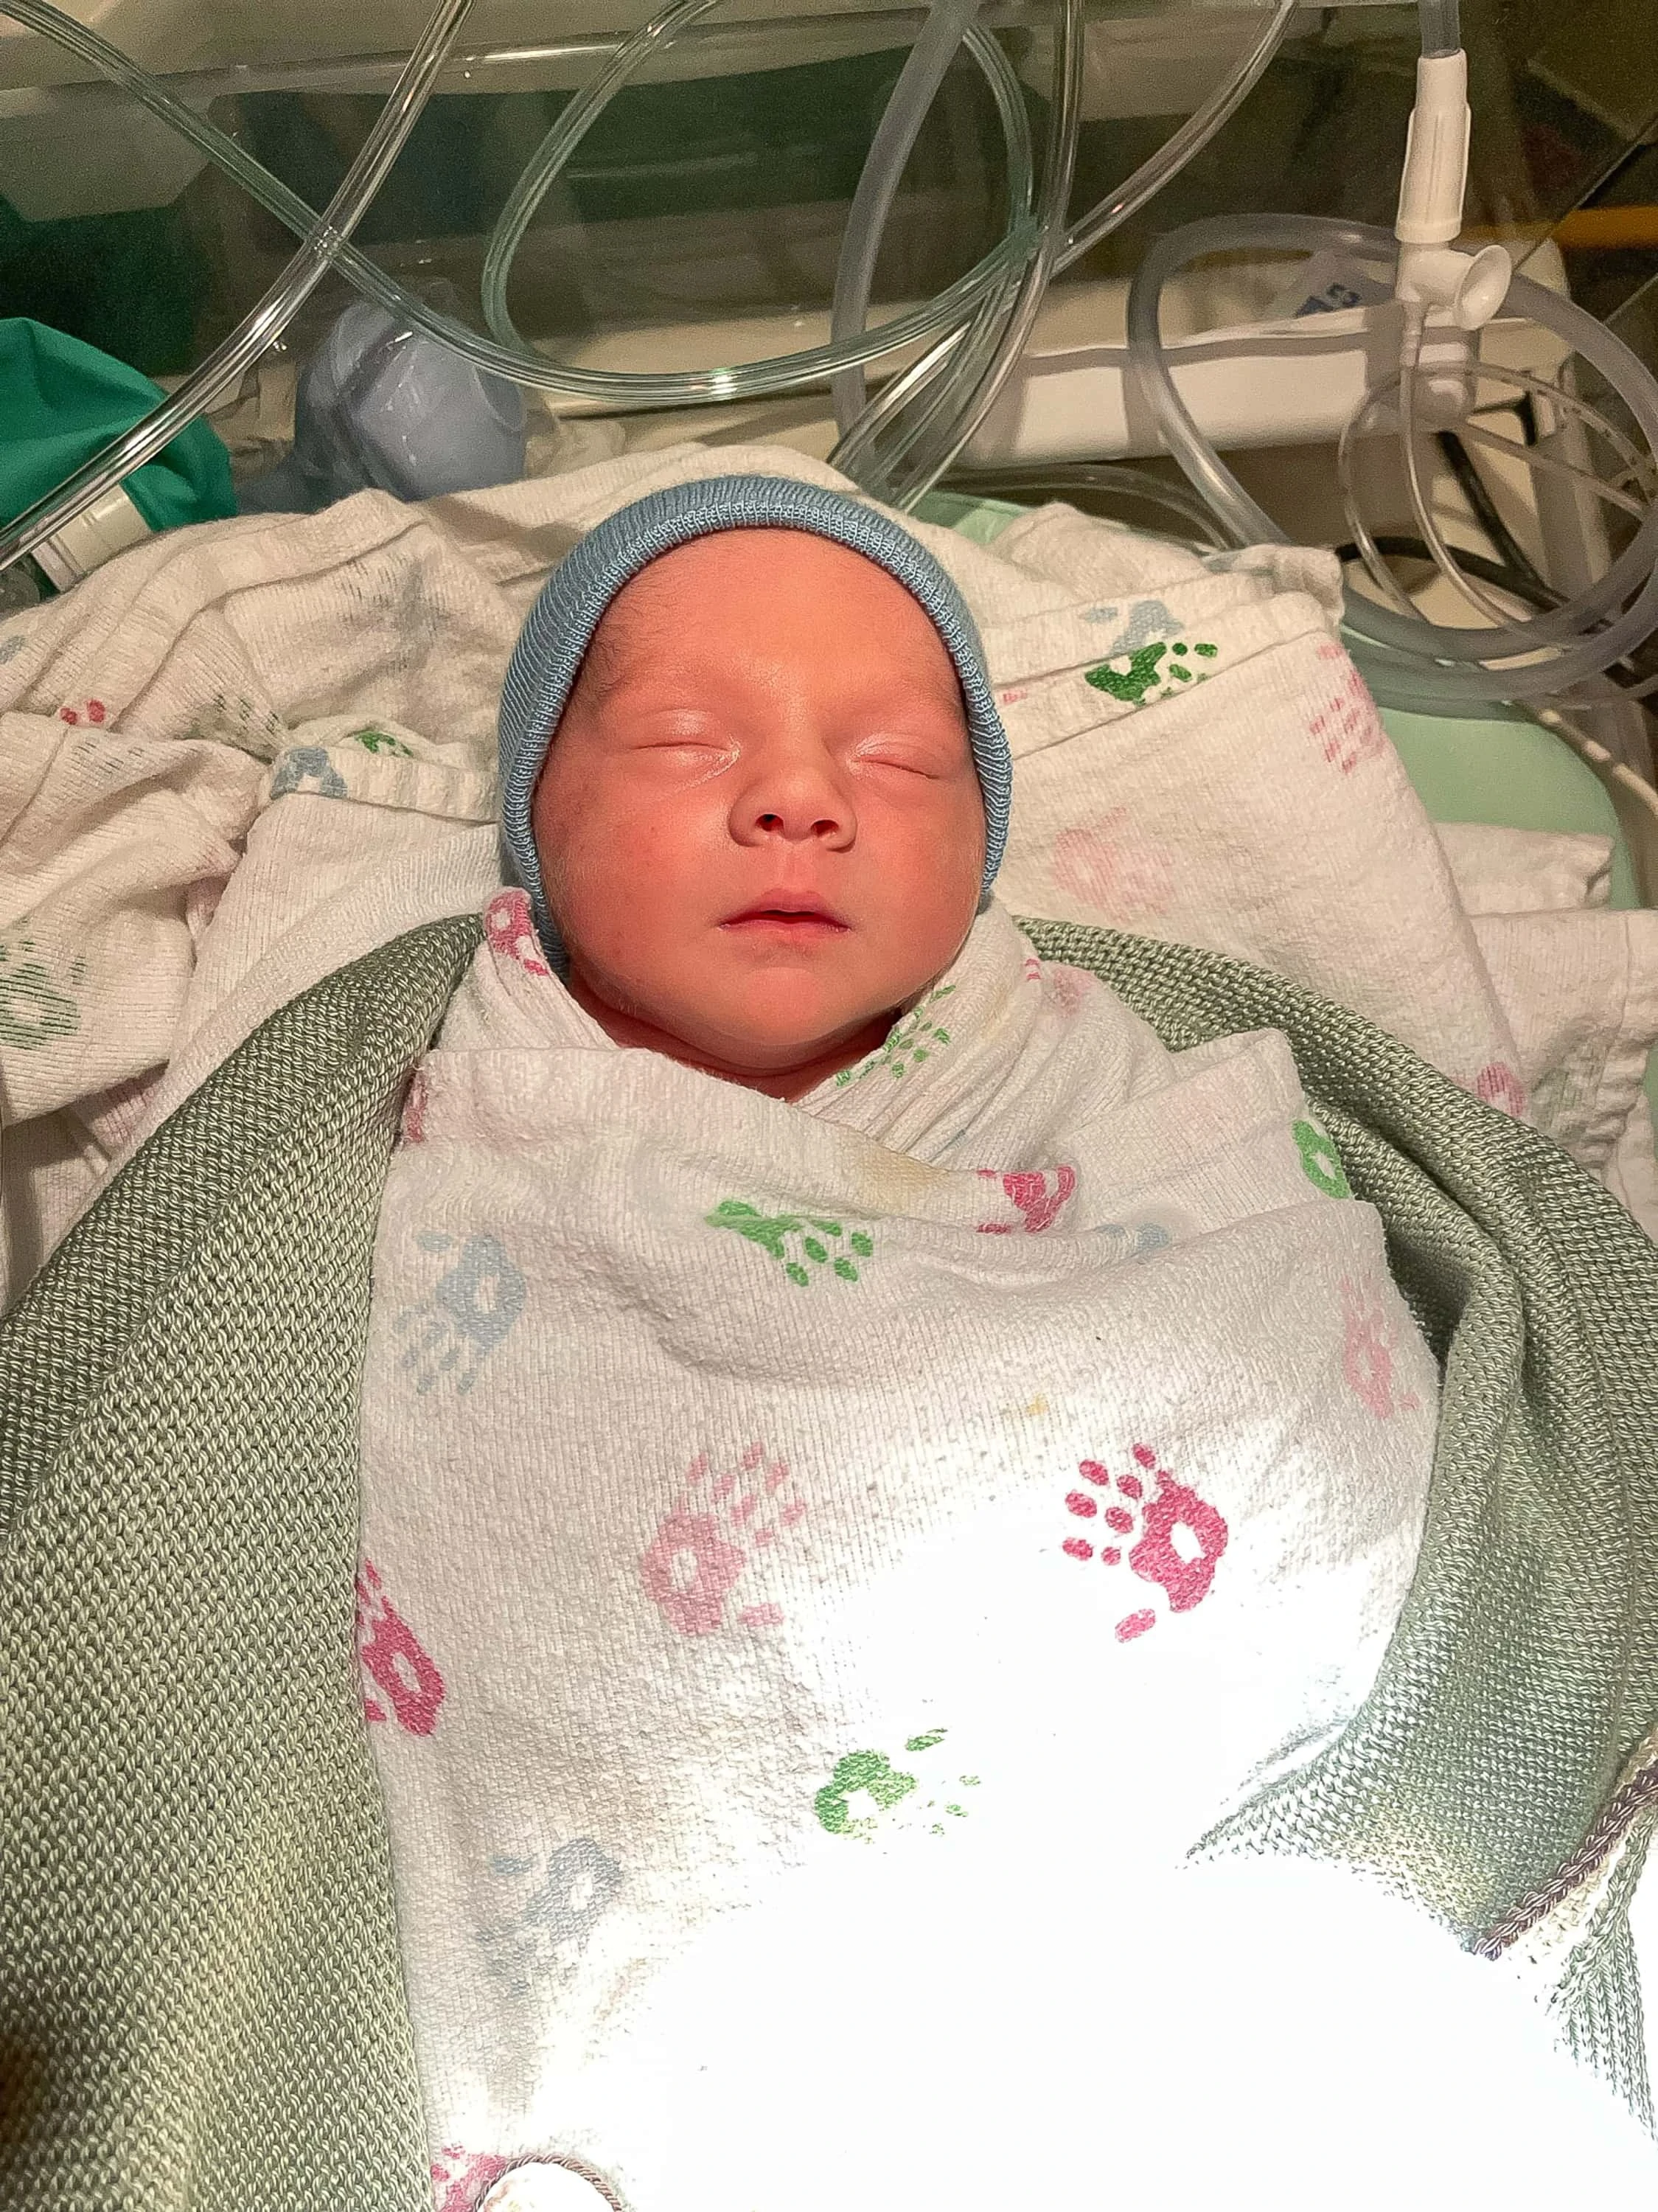 Our baby boy from my c-section birth